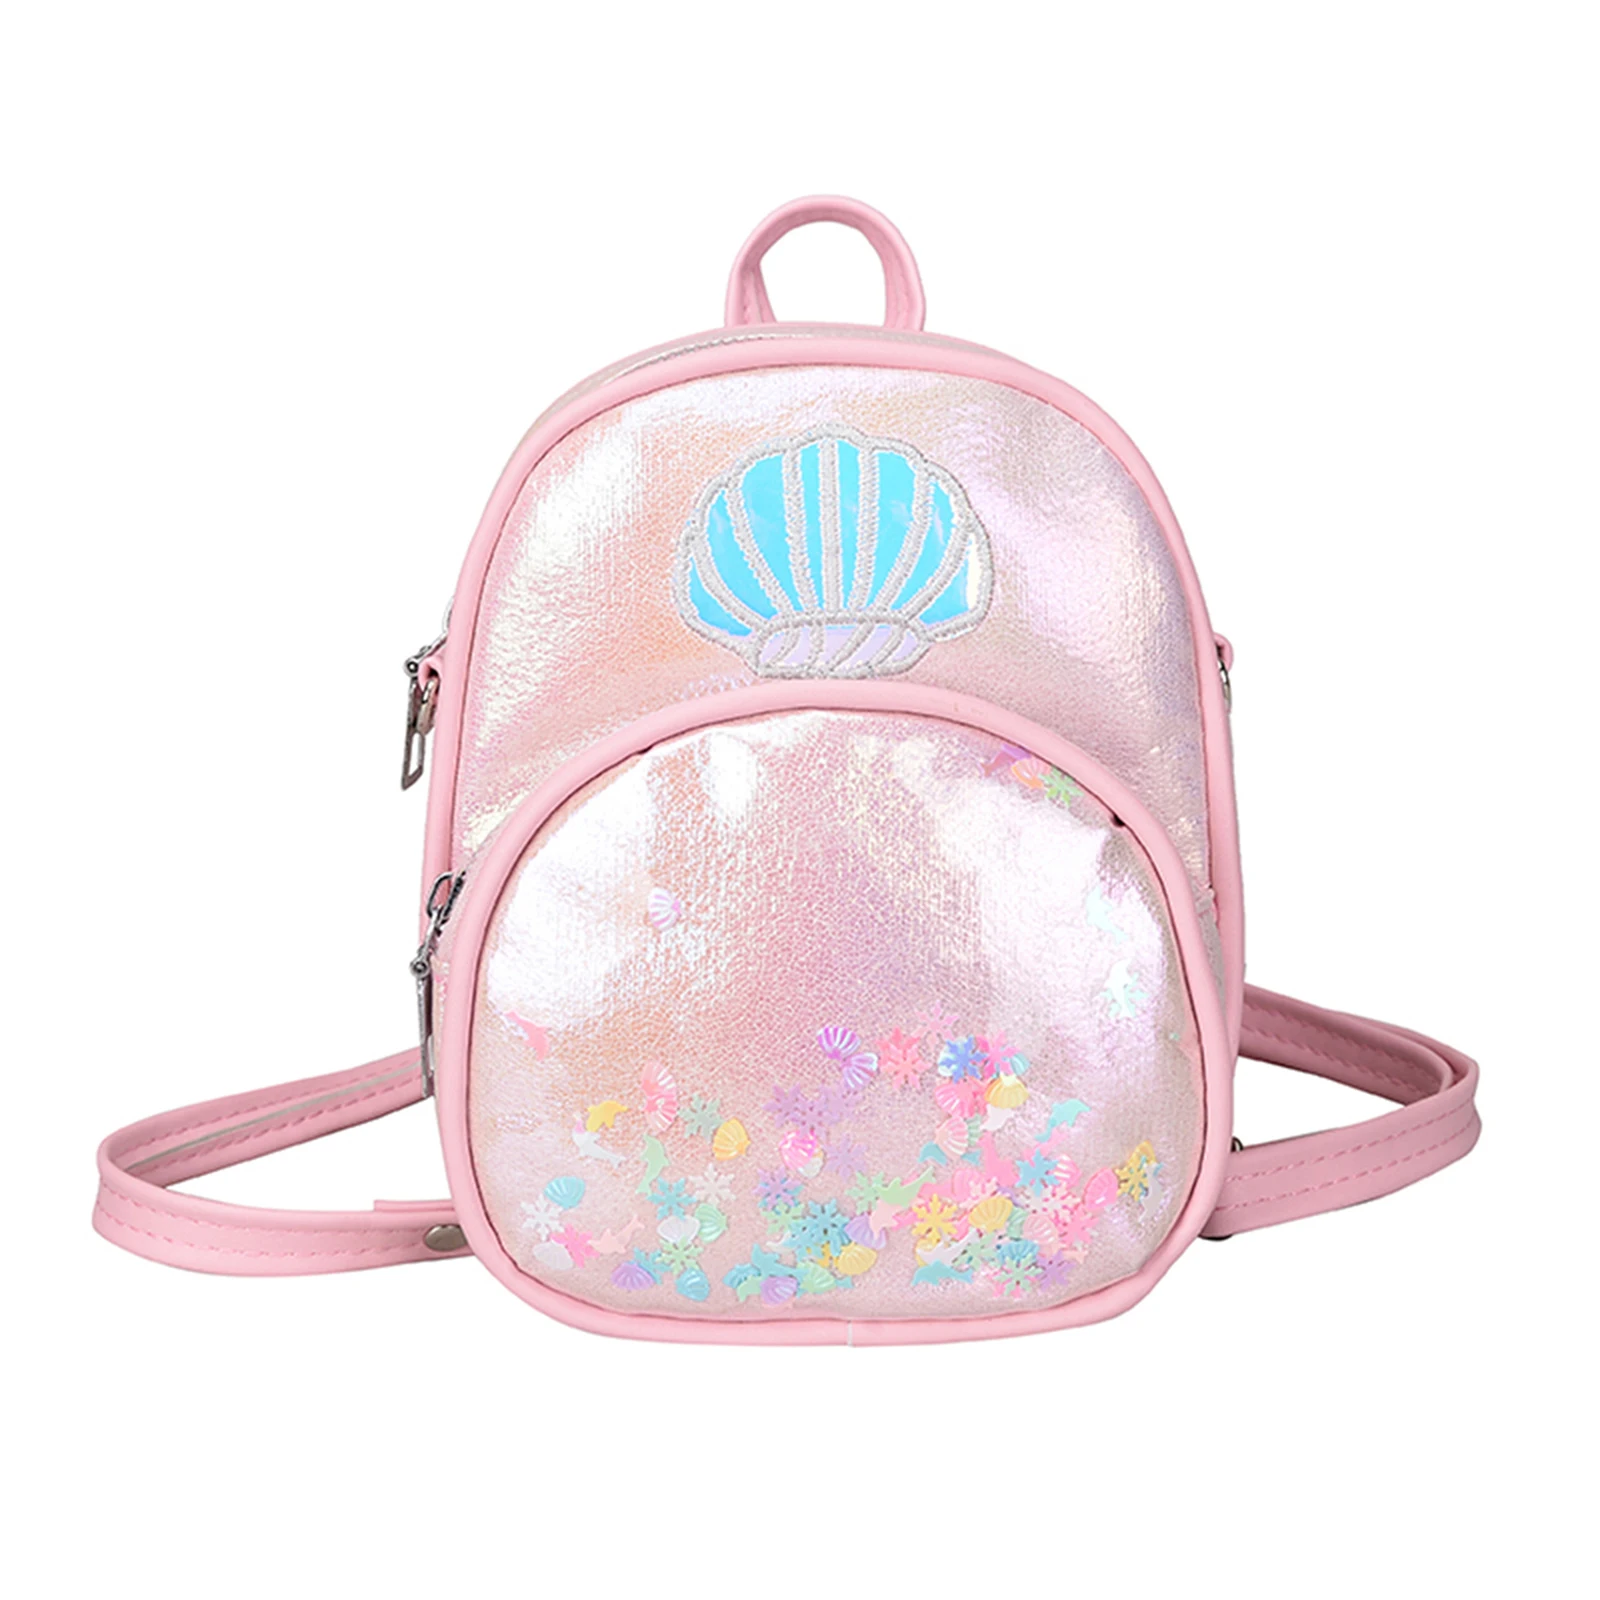 

Little Girls Zipper Schoolbag Backpack Toddlers Sweet Style Shell Embroidery Drift Sand Laser Messenger Bag Casual